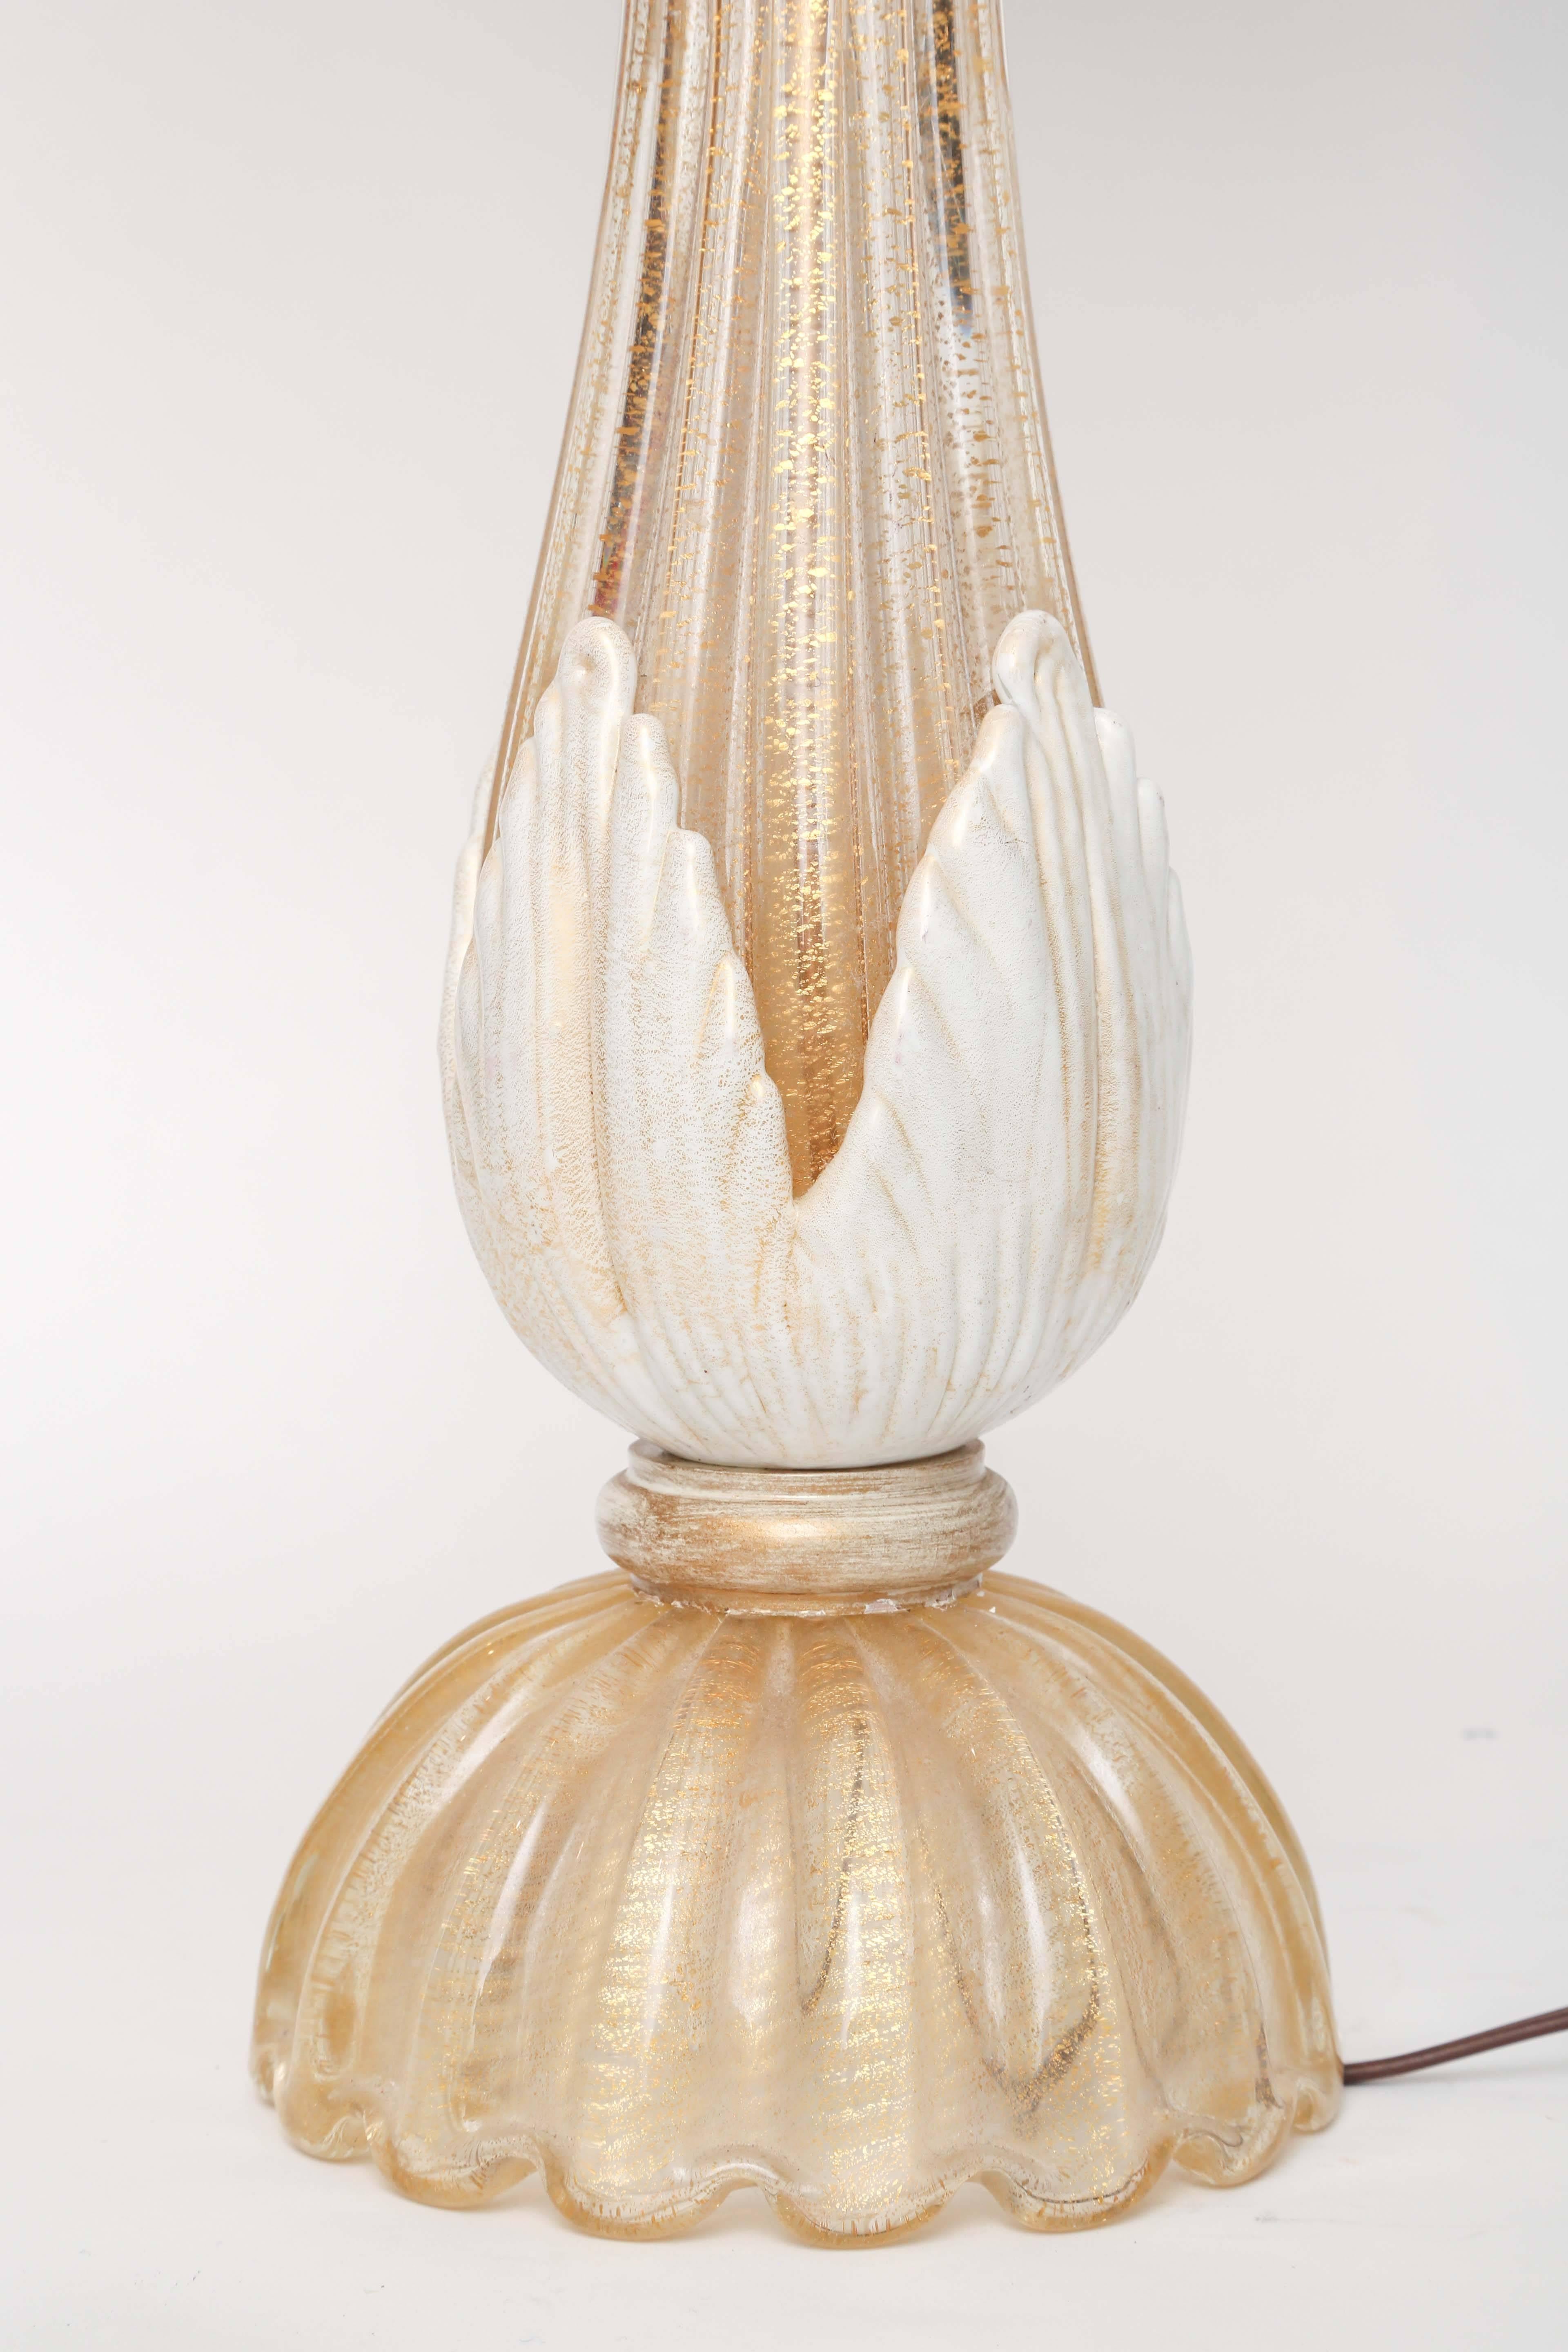 Blown glass in clear, gold and white by Barovier / Toso in Murano, Italy. Neck, light socket, adjustable harp and finial are in brass. Electrical is original and in working order. Uses a regular bulb. Shade not included. Glass is in excellent shape.